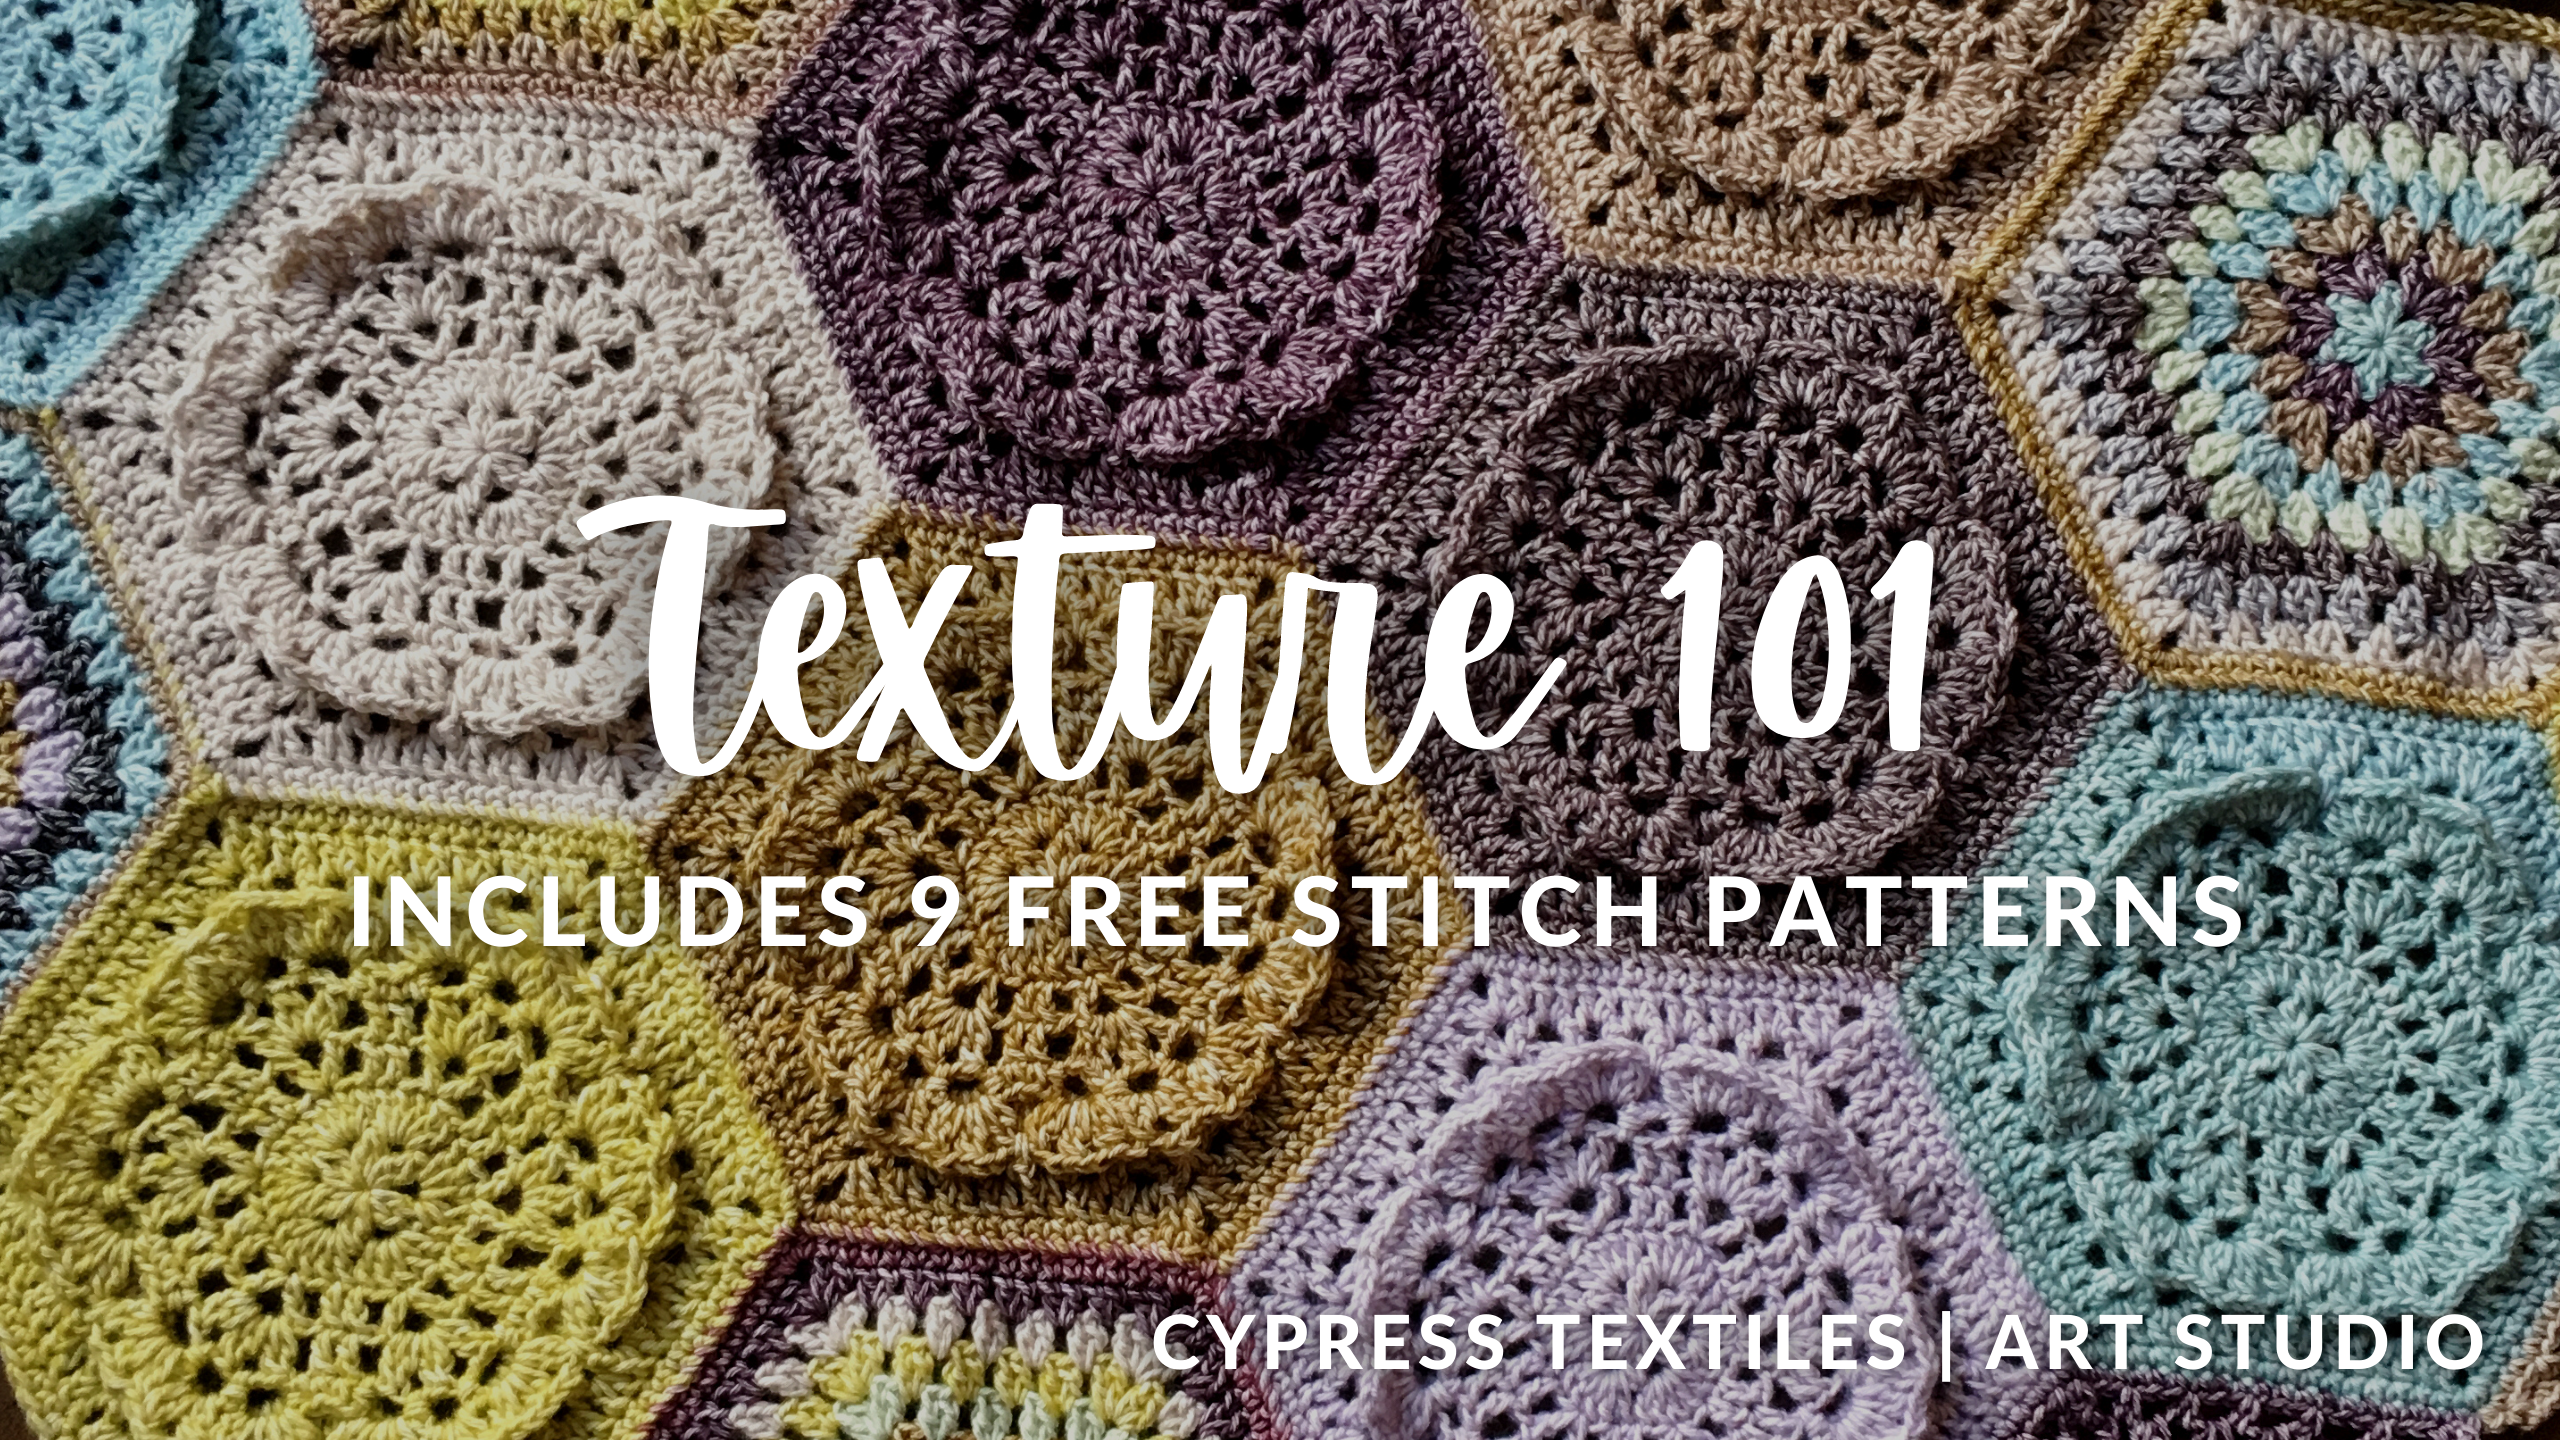 Creating Beautiful Things in Life: How to properly size crochet